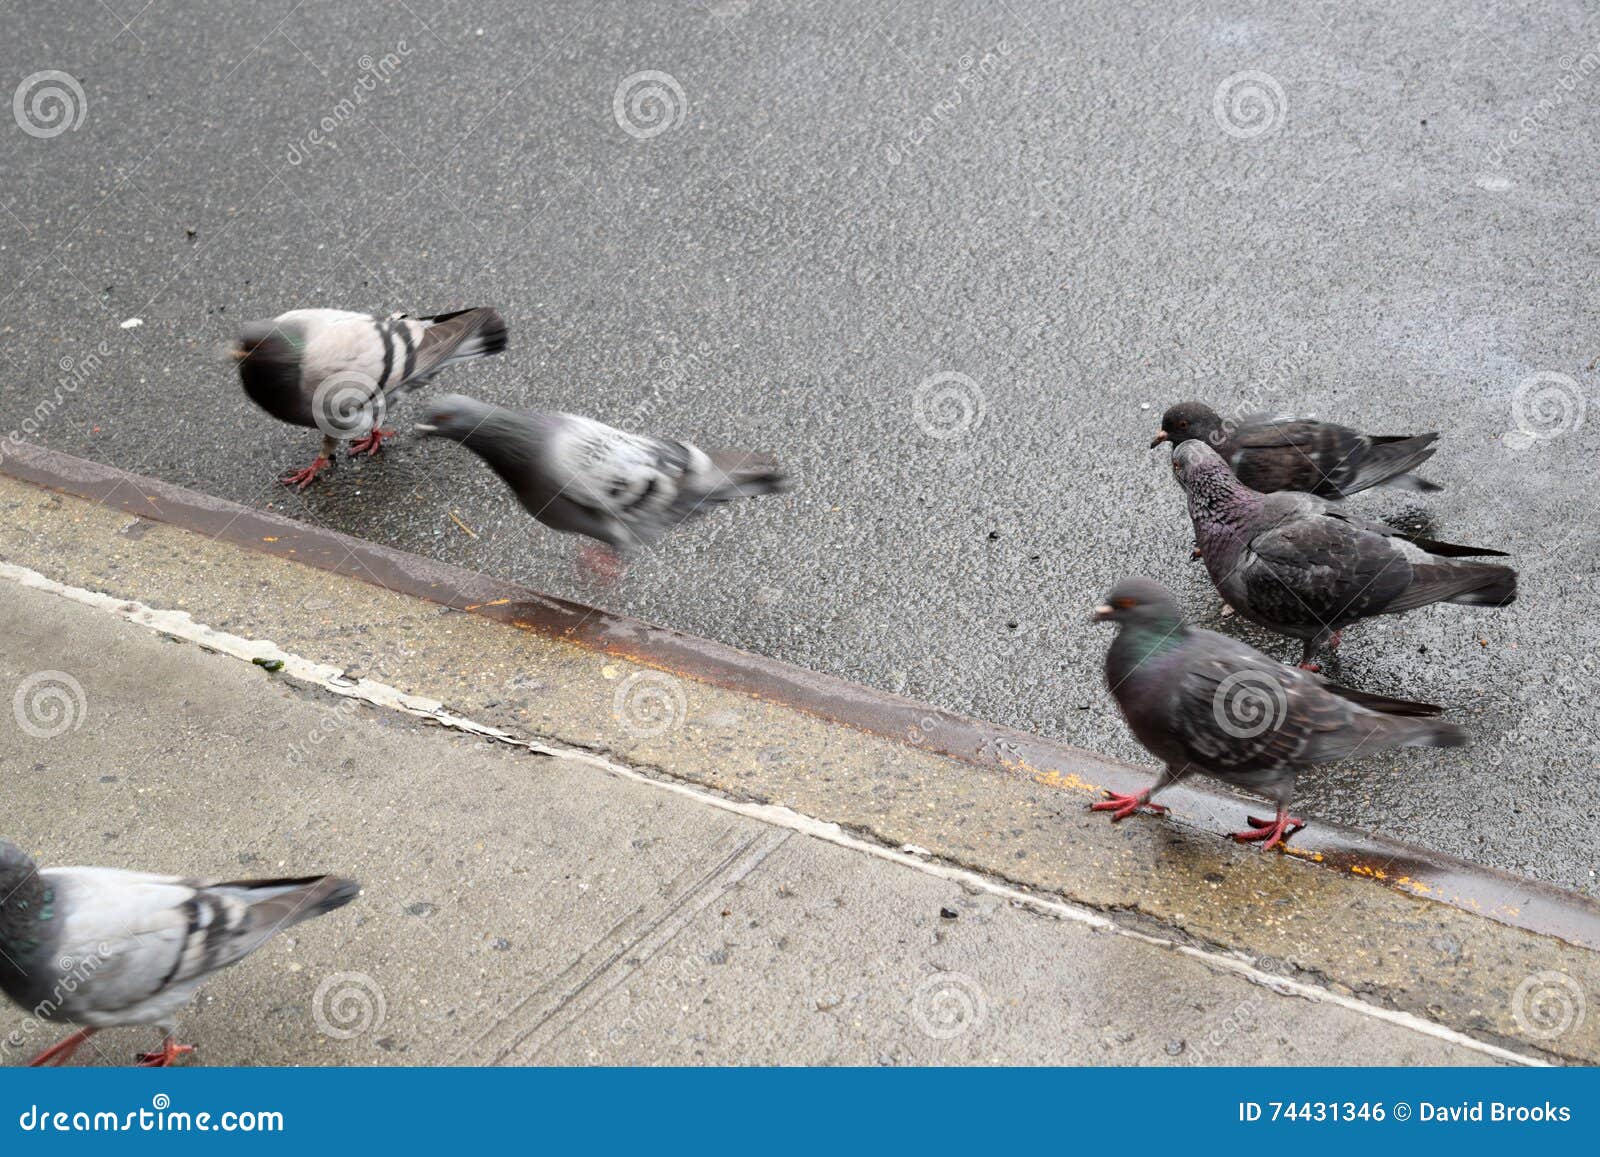 pigeons in times square in manhattan